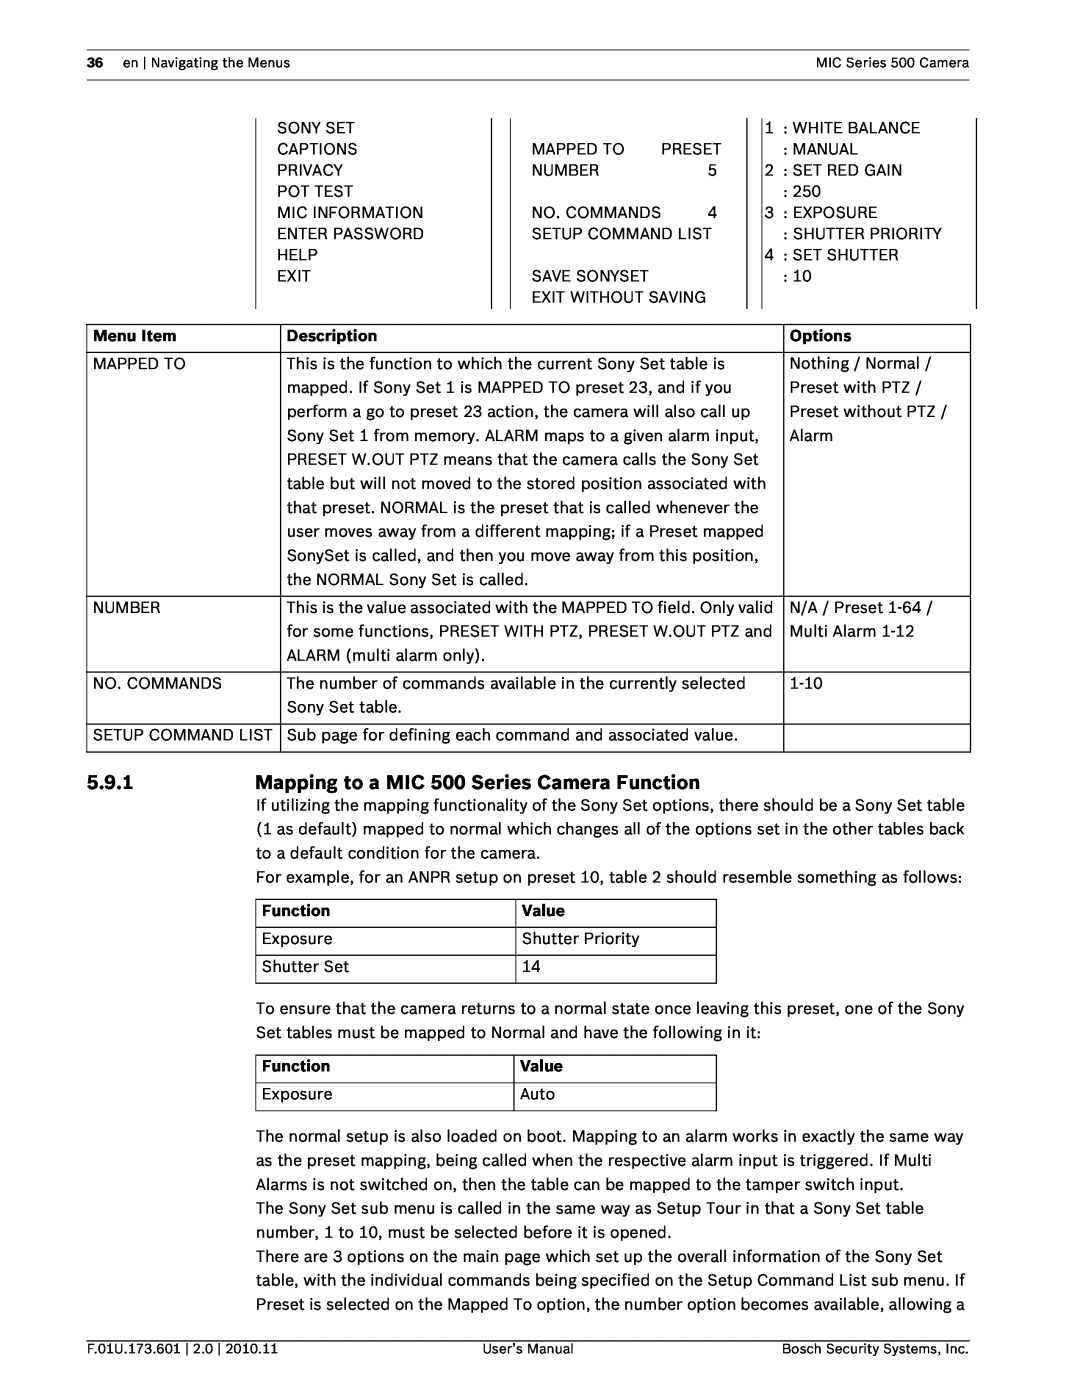 Bosch Appliances user manual 5.9.1, Mapping to a MIC 500 Series Camera Function, Menu Item, Description, Options, Value 